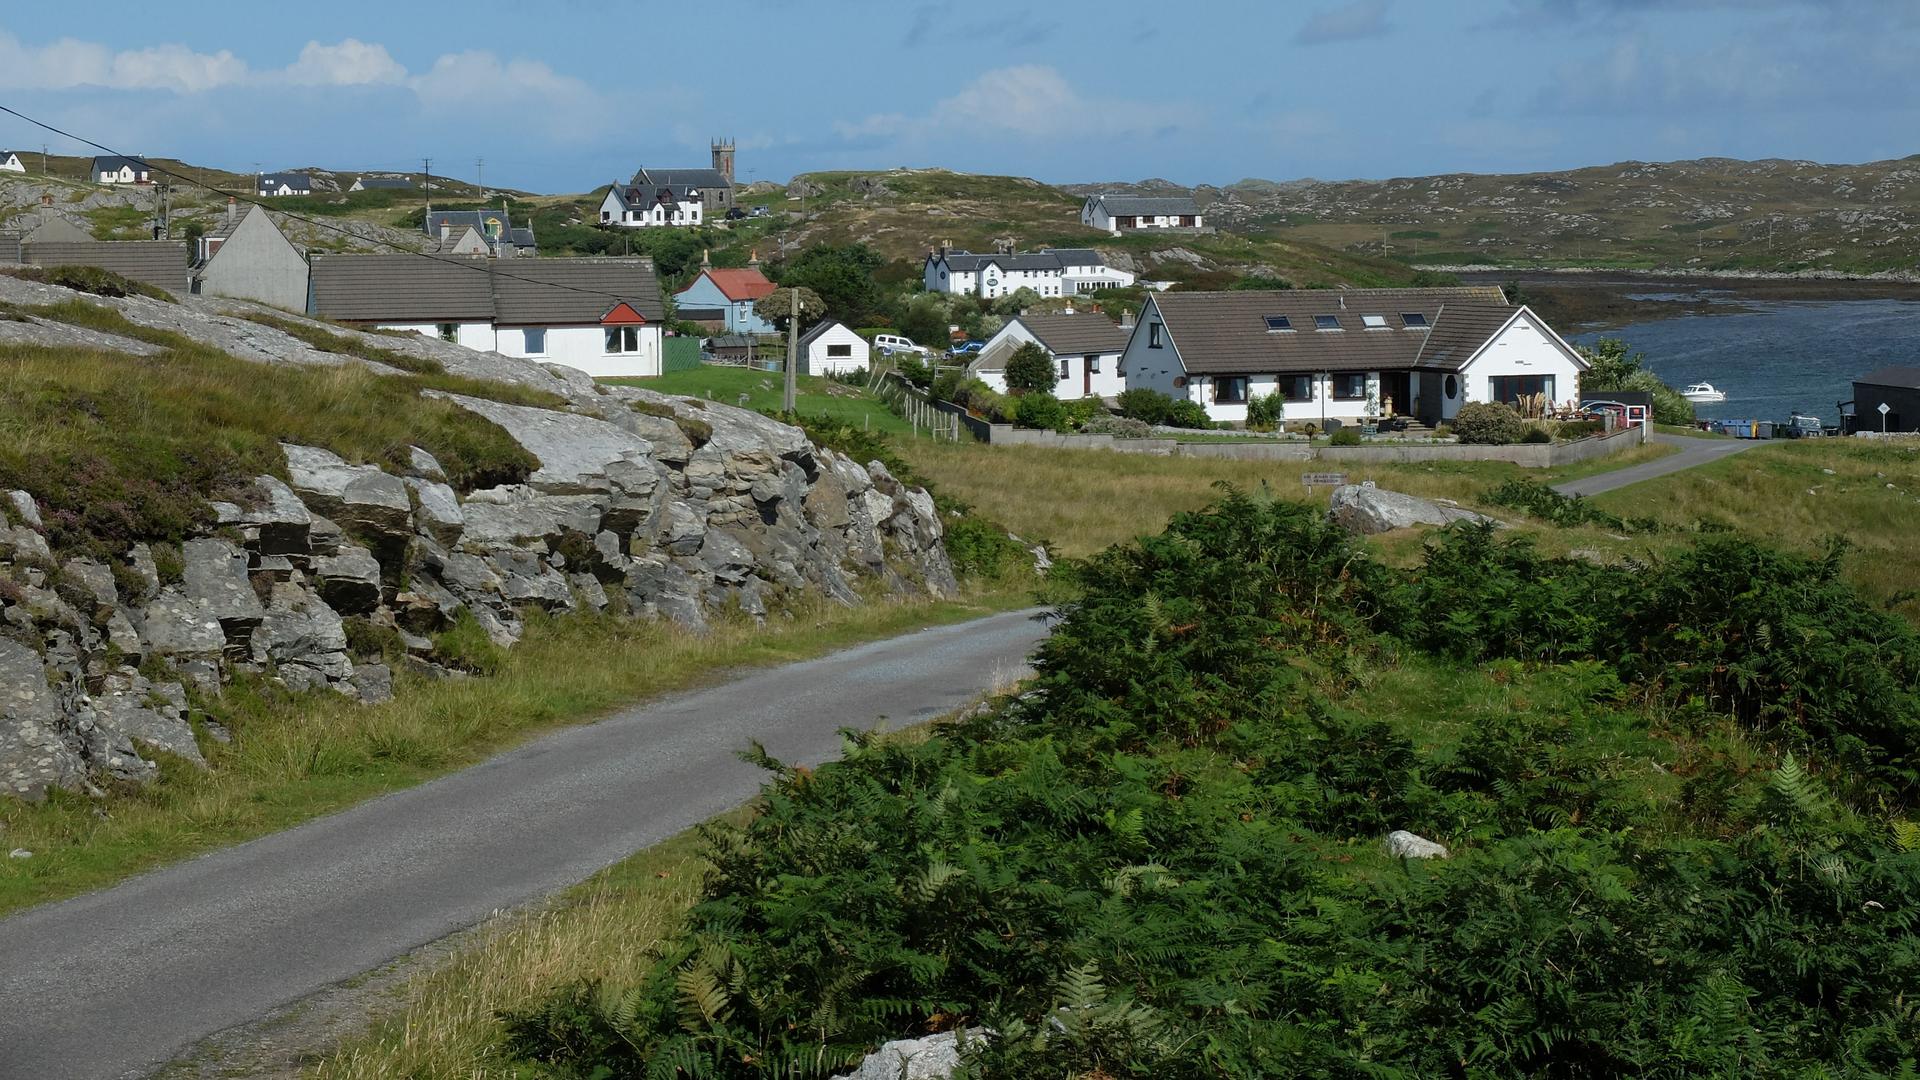 The village of Arinagour on the remote Scottish island.